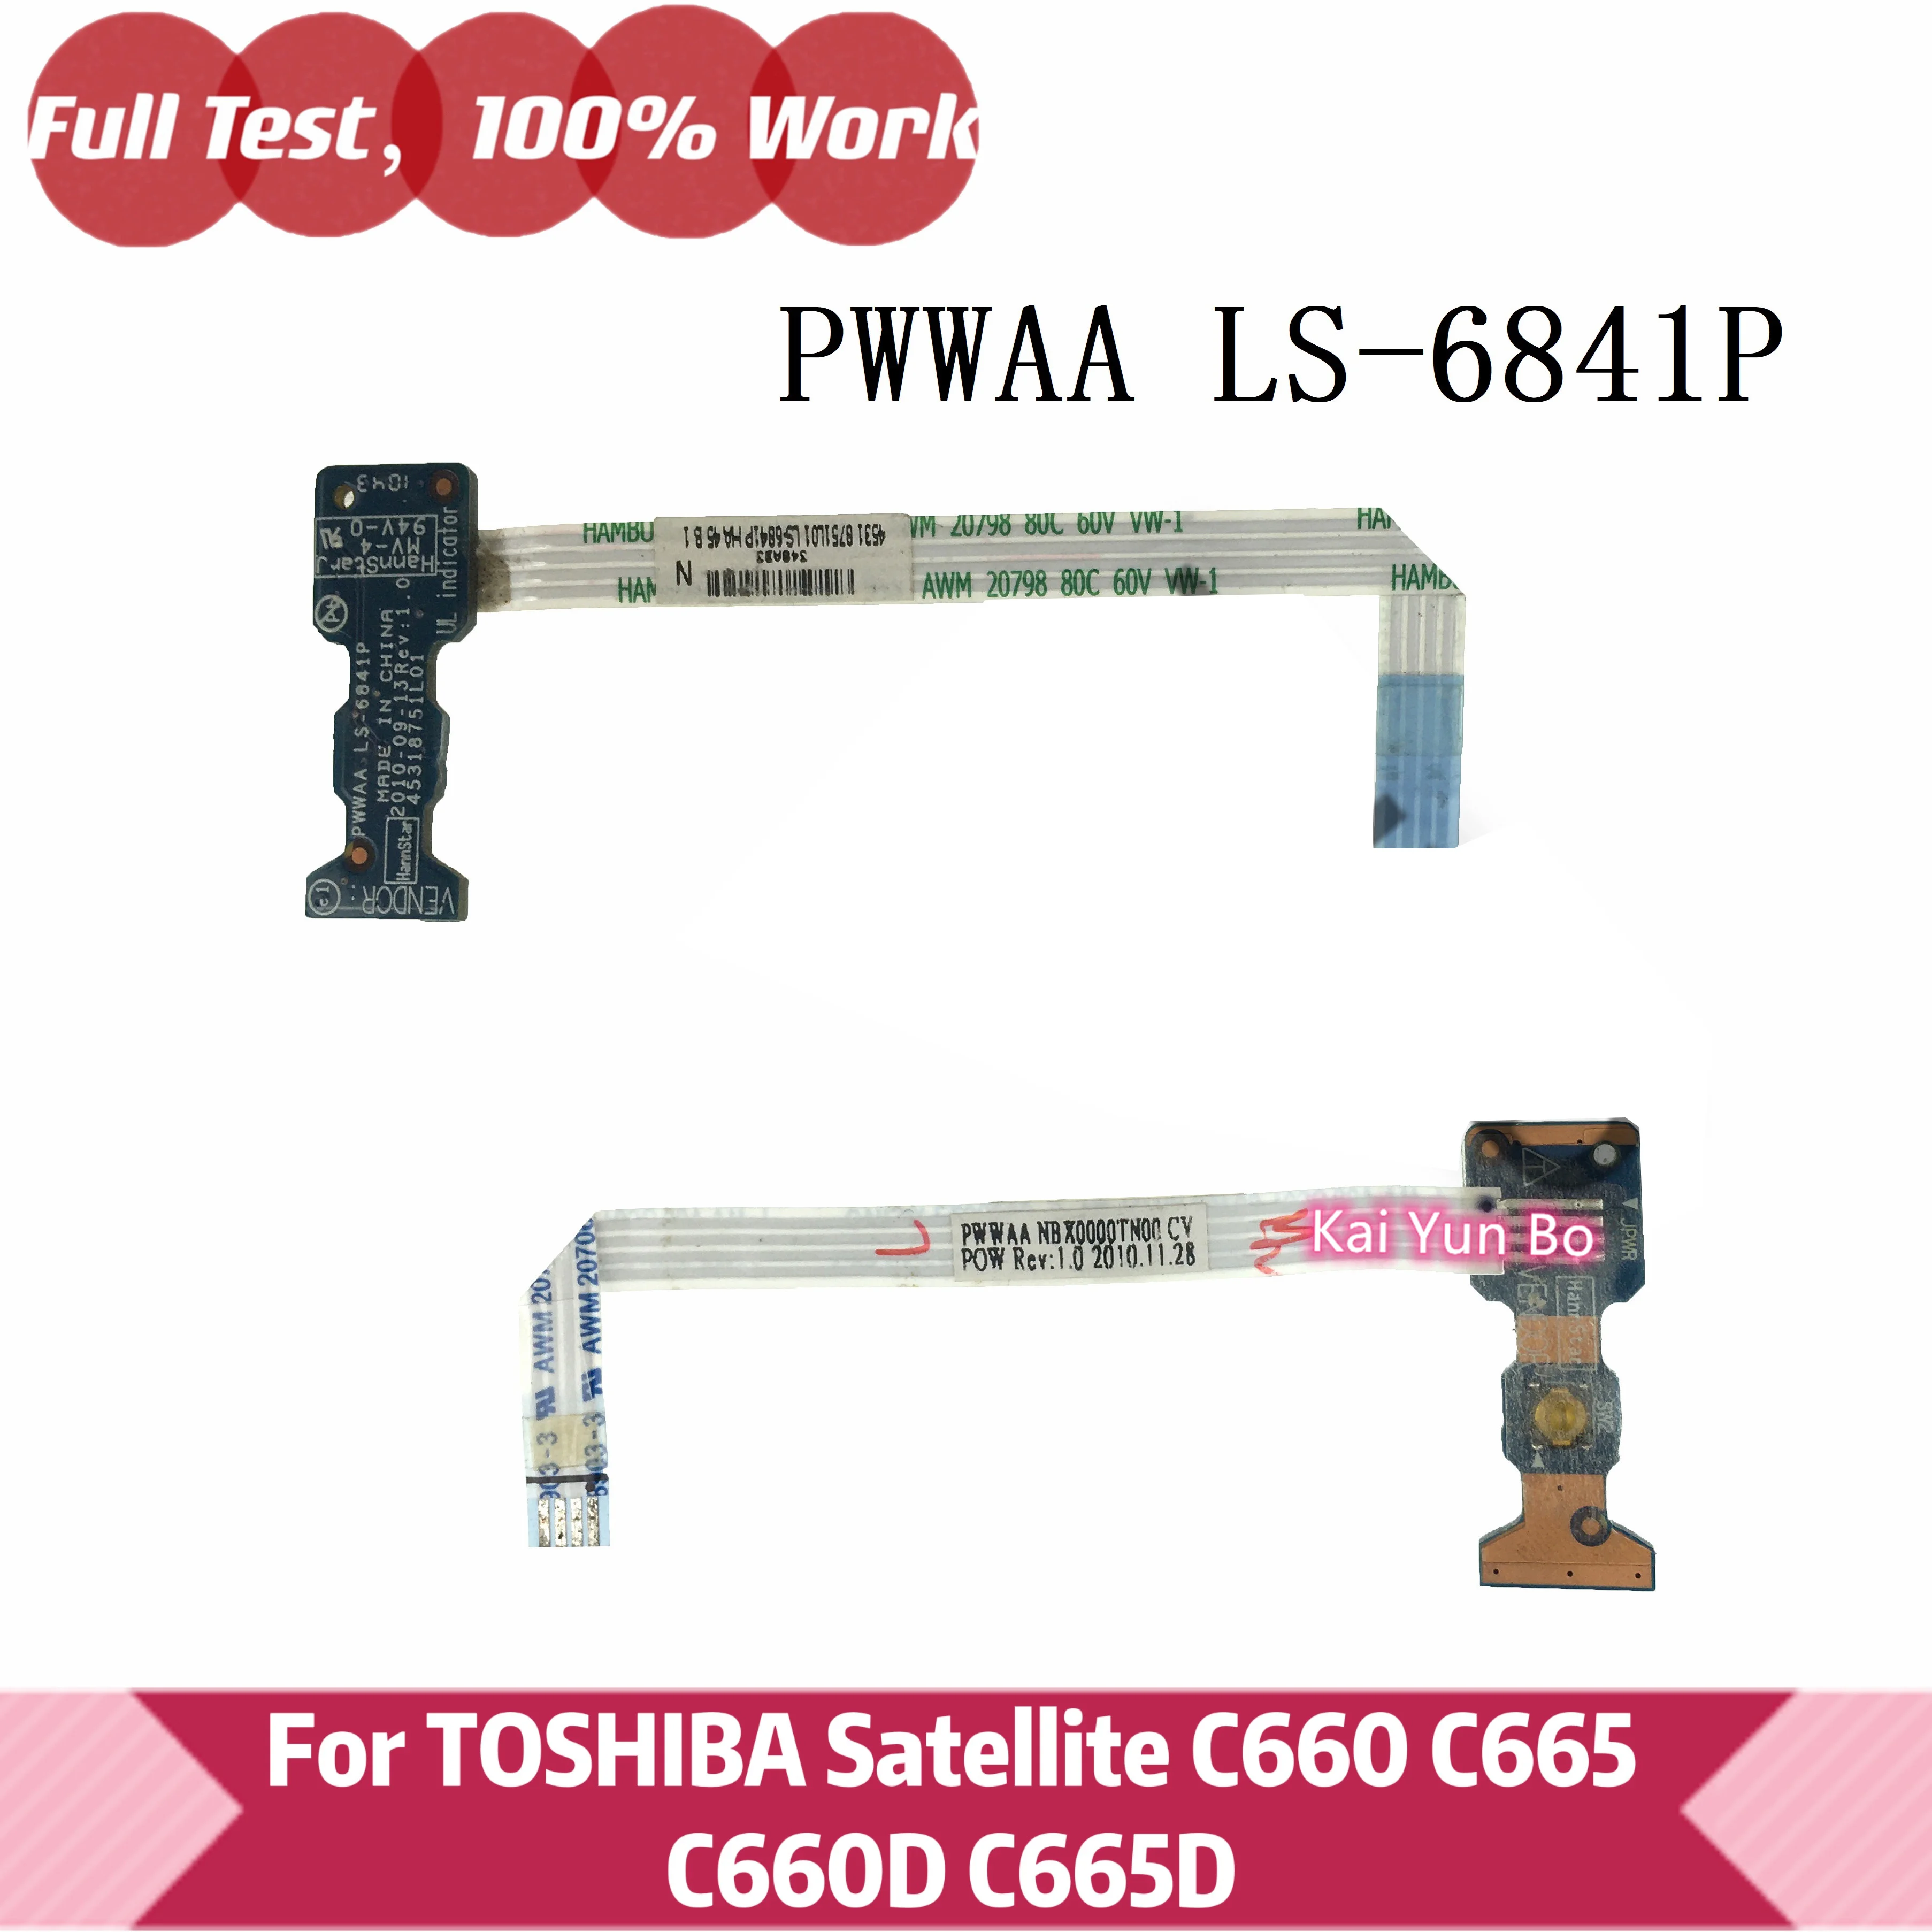 

For TOSHIBA Satellite C660 C665 C660D C665D Power Button Board With Cable PWWAA LS-6841P